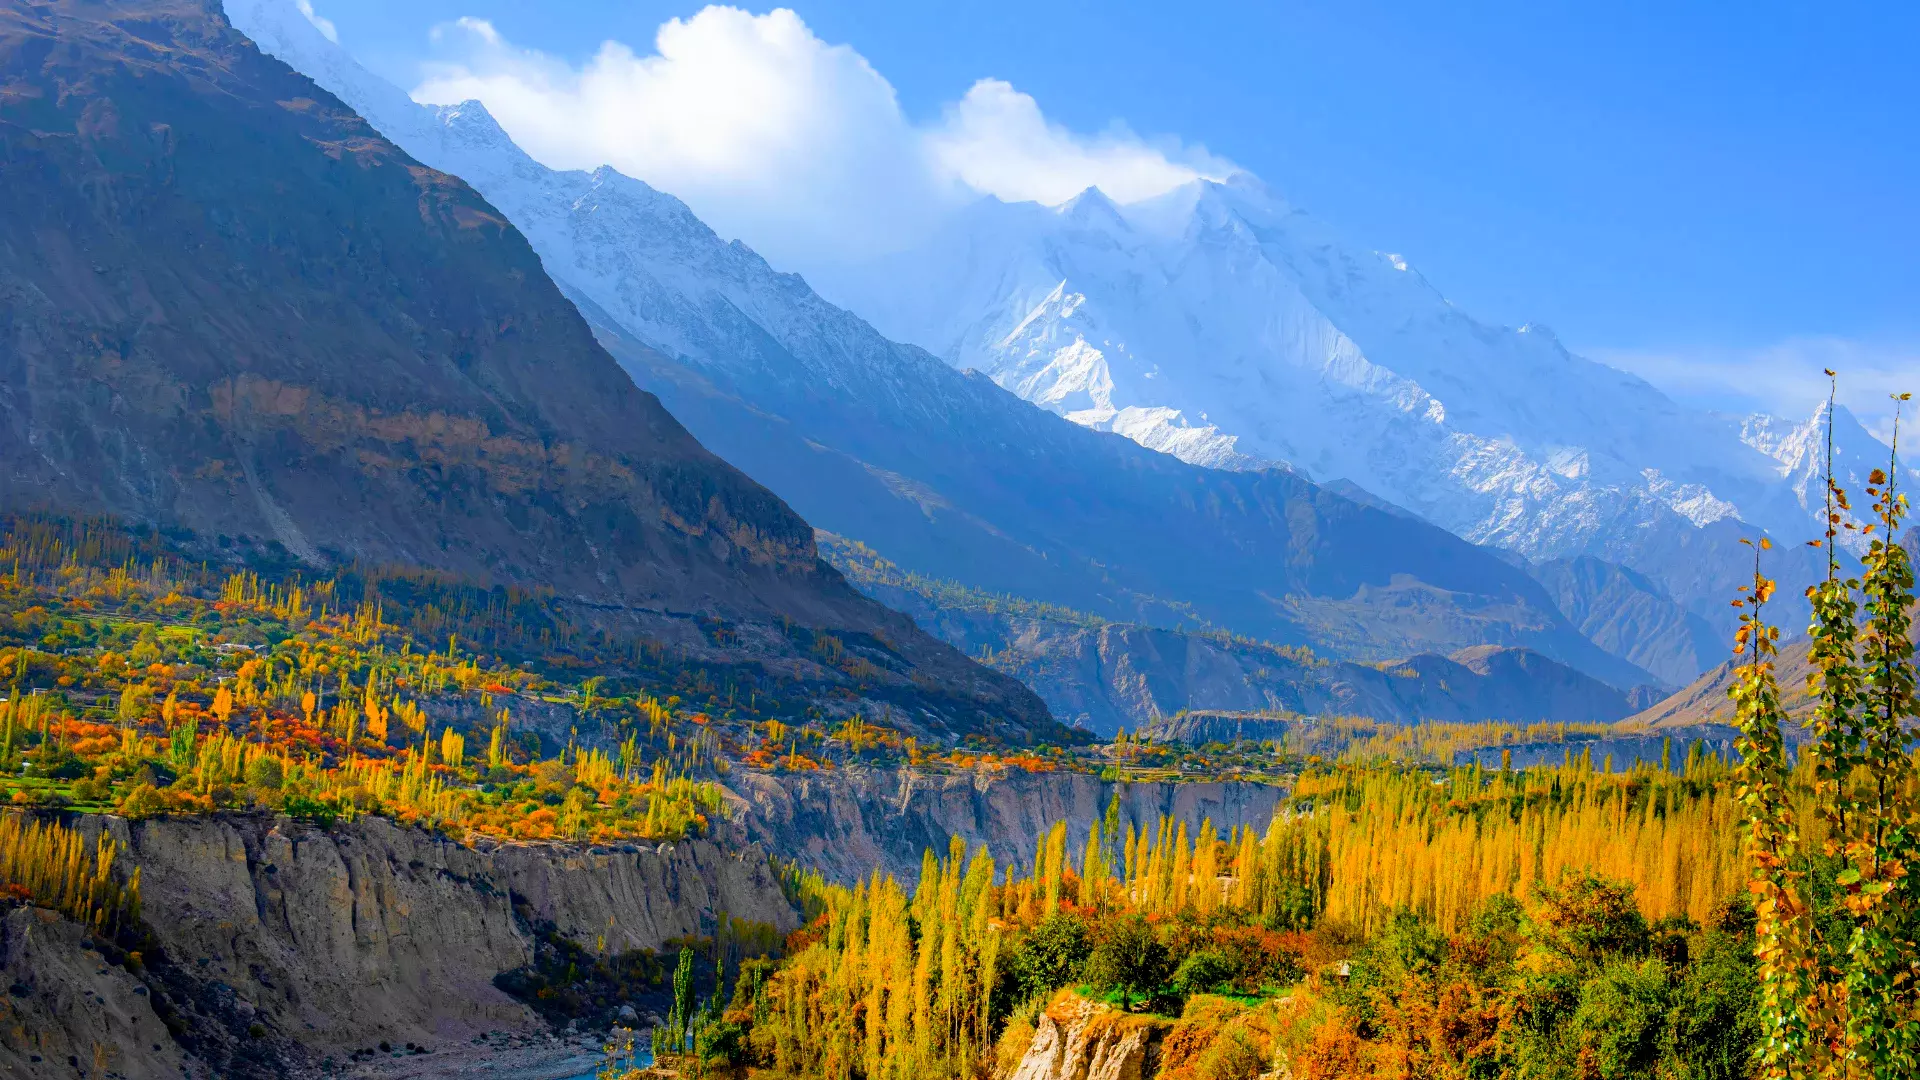 Scenic view of Hunza Valley in the Northern Areas of Pakistan, with majestic mountains and terraced fields.